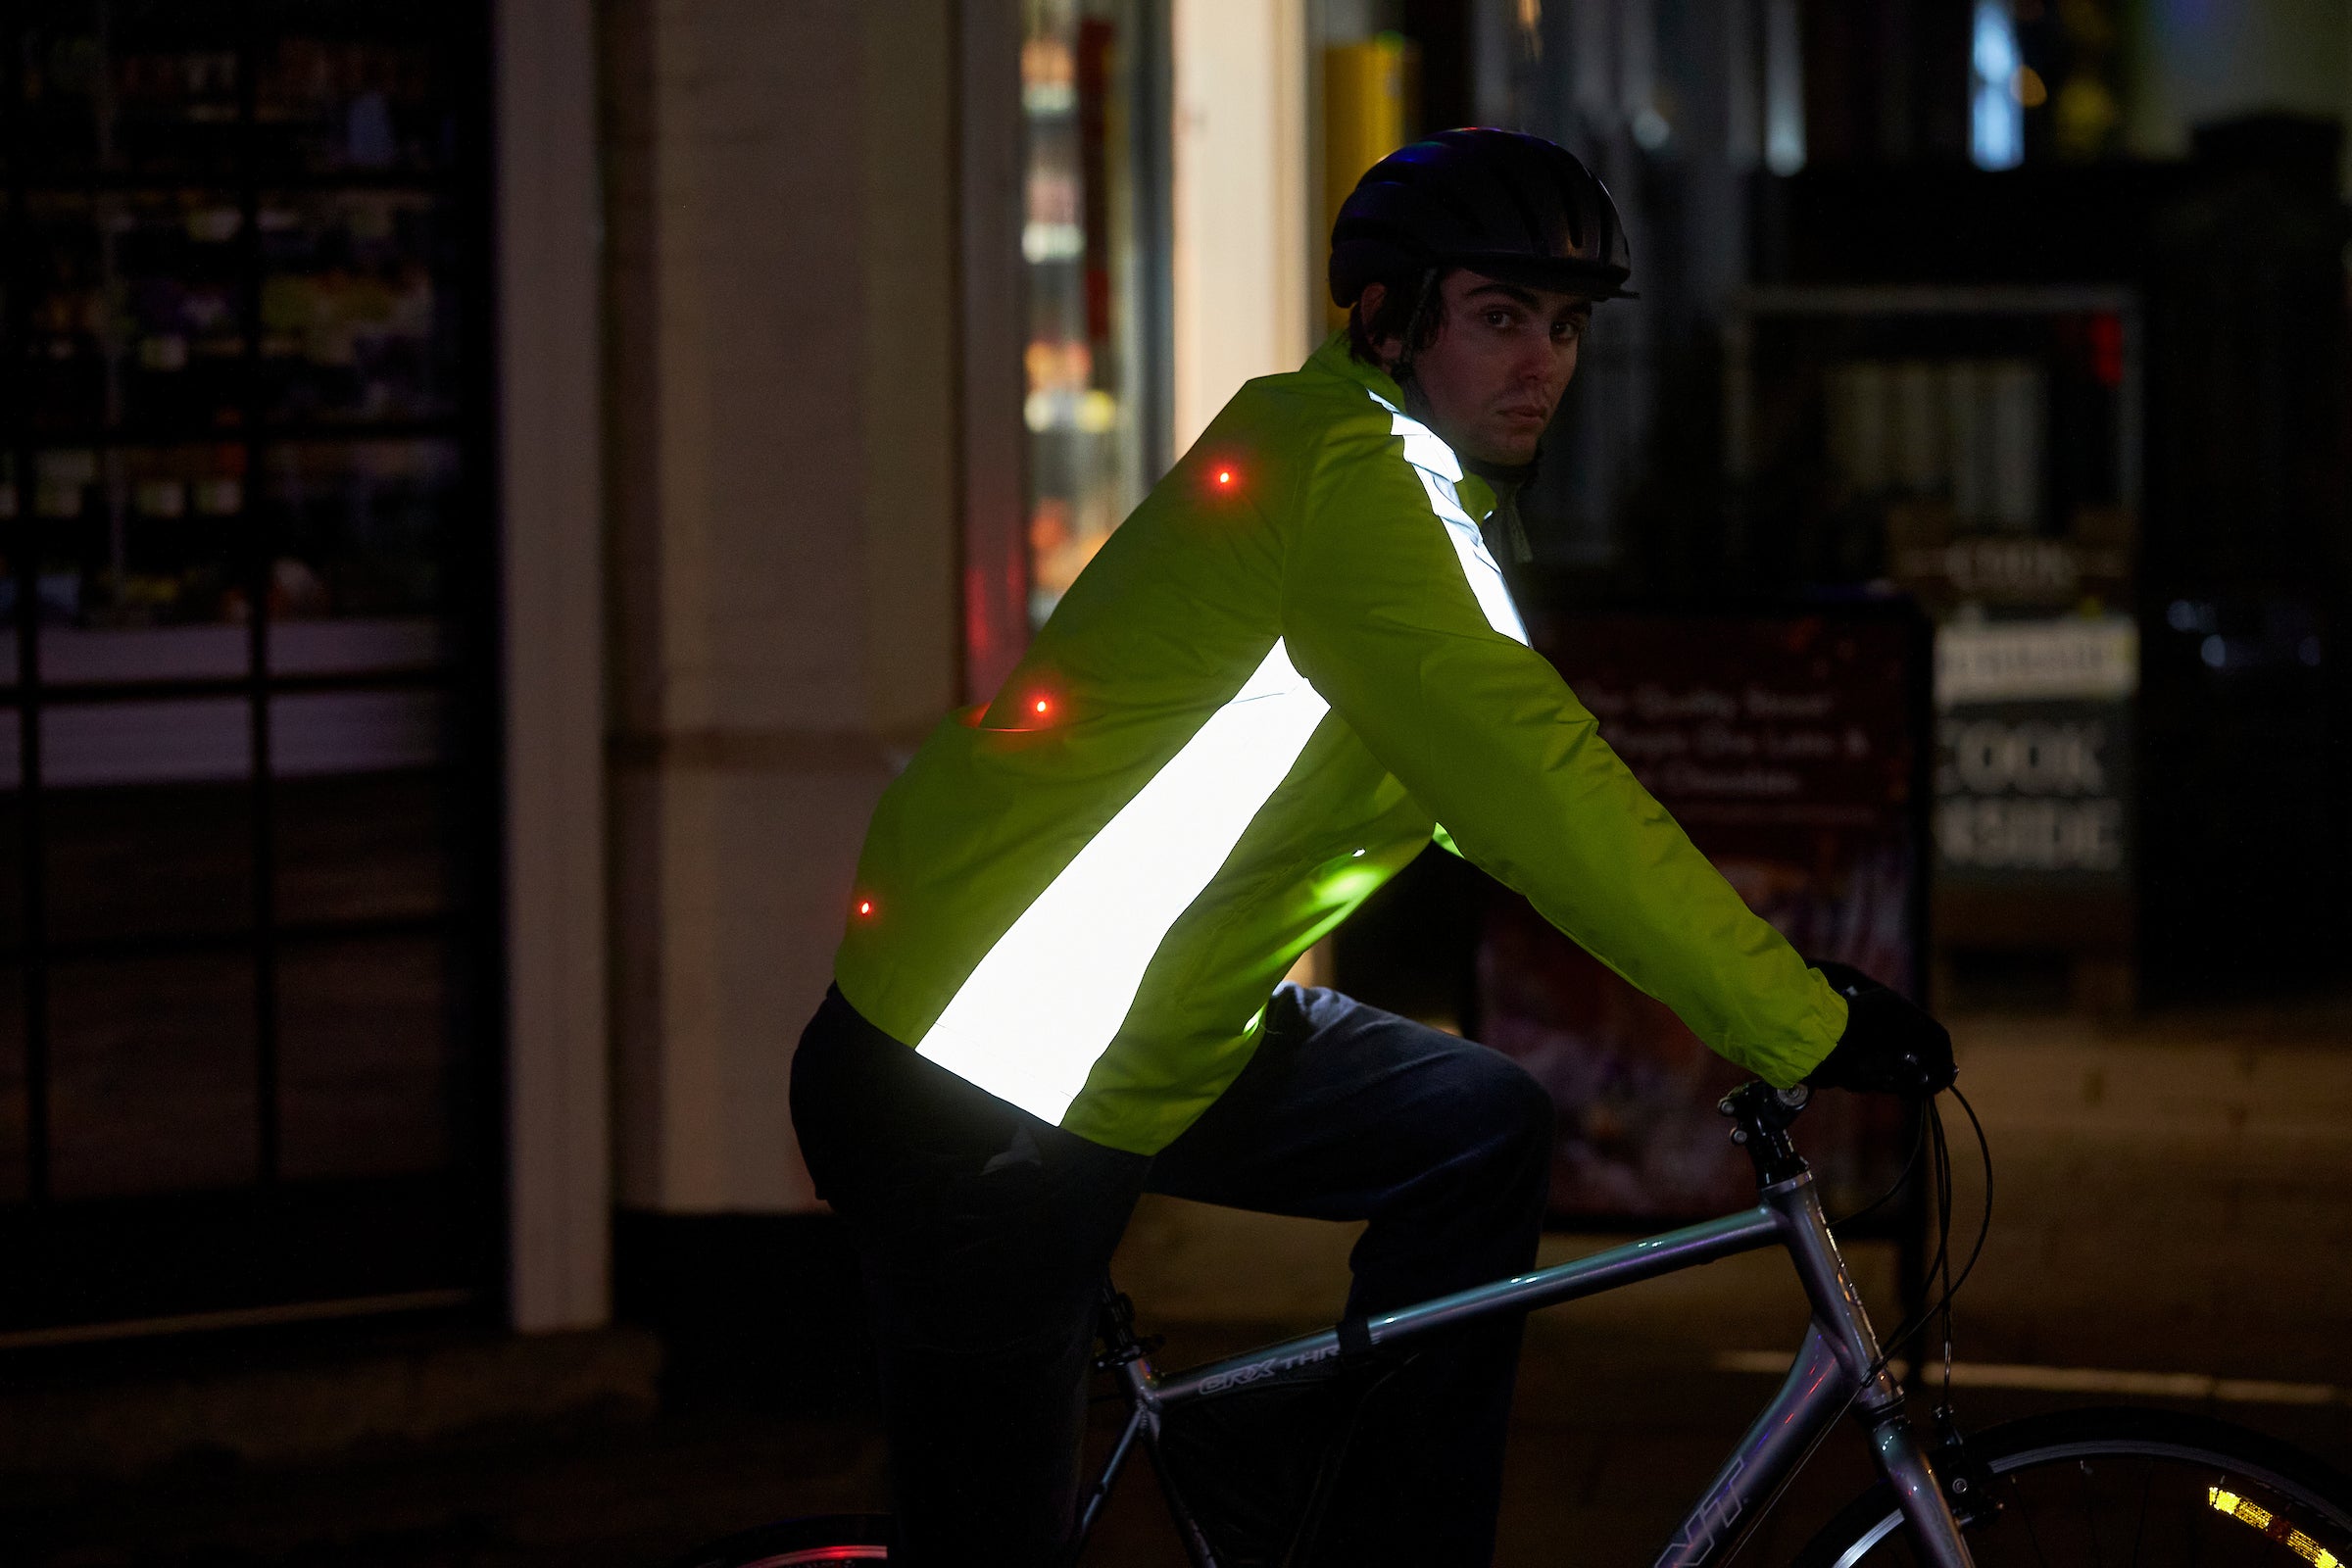 High Visibility jacket with lights